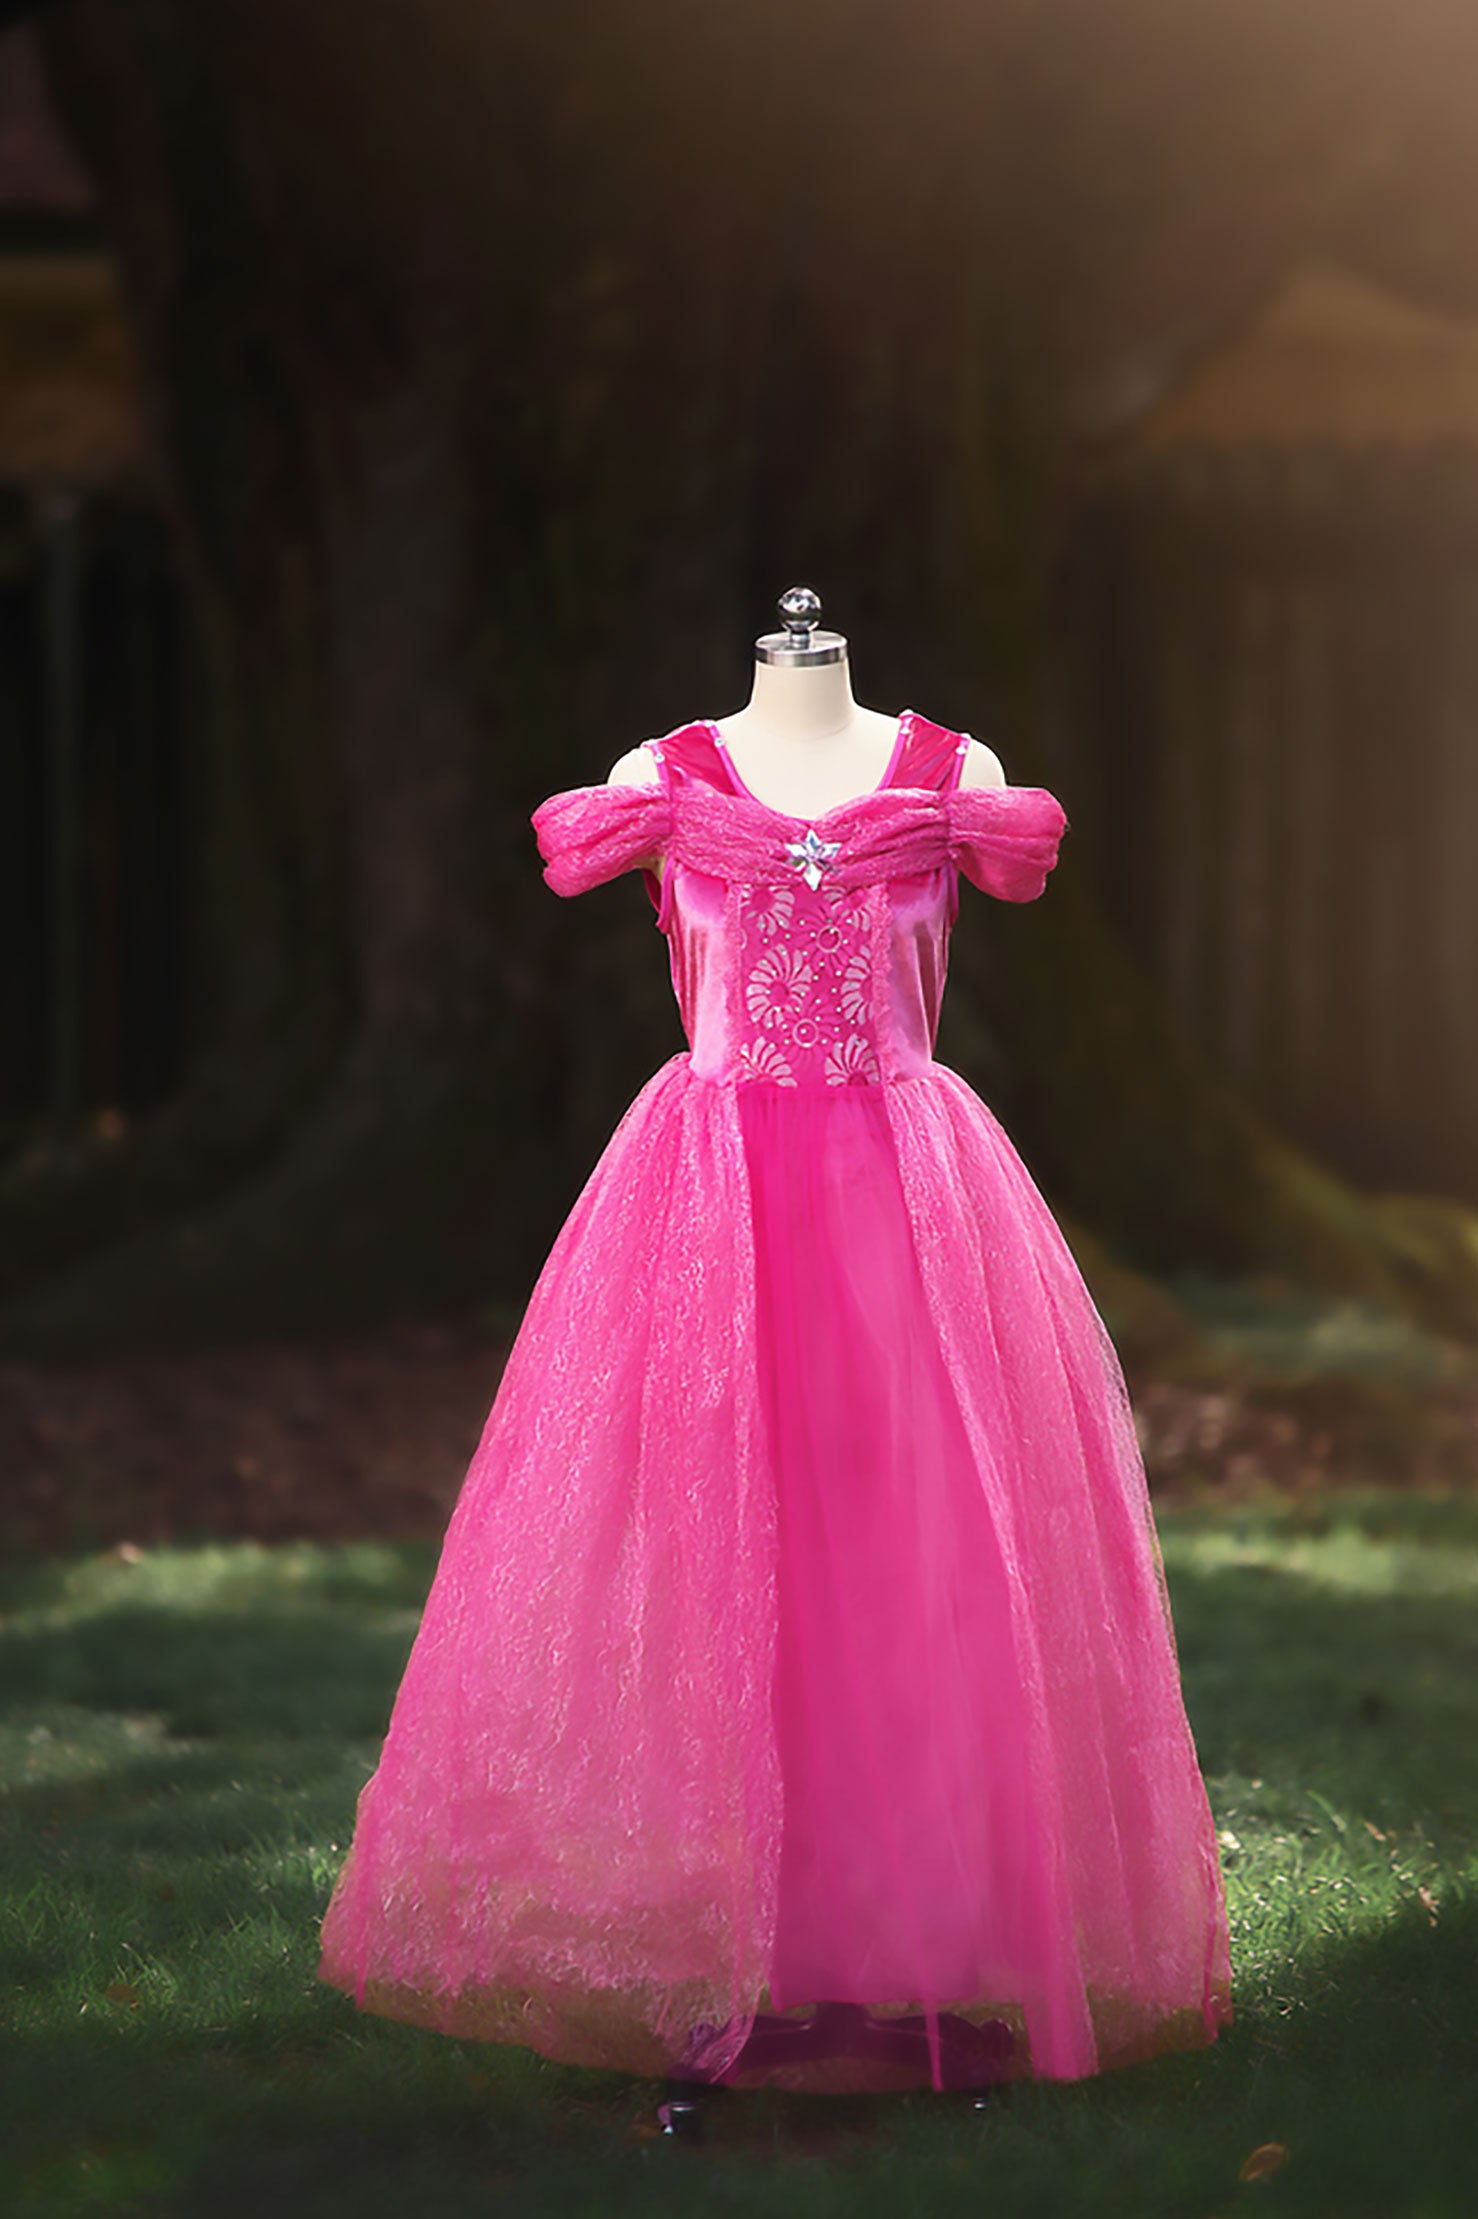 PINK PRINCESS GOWN FOR WOMEN